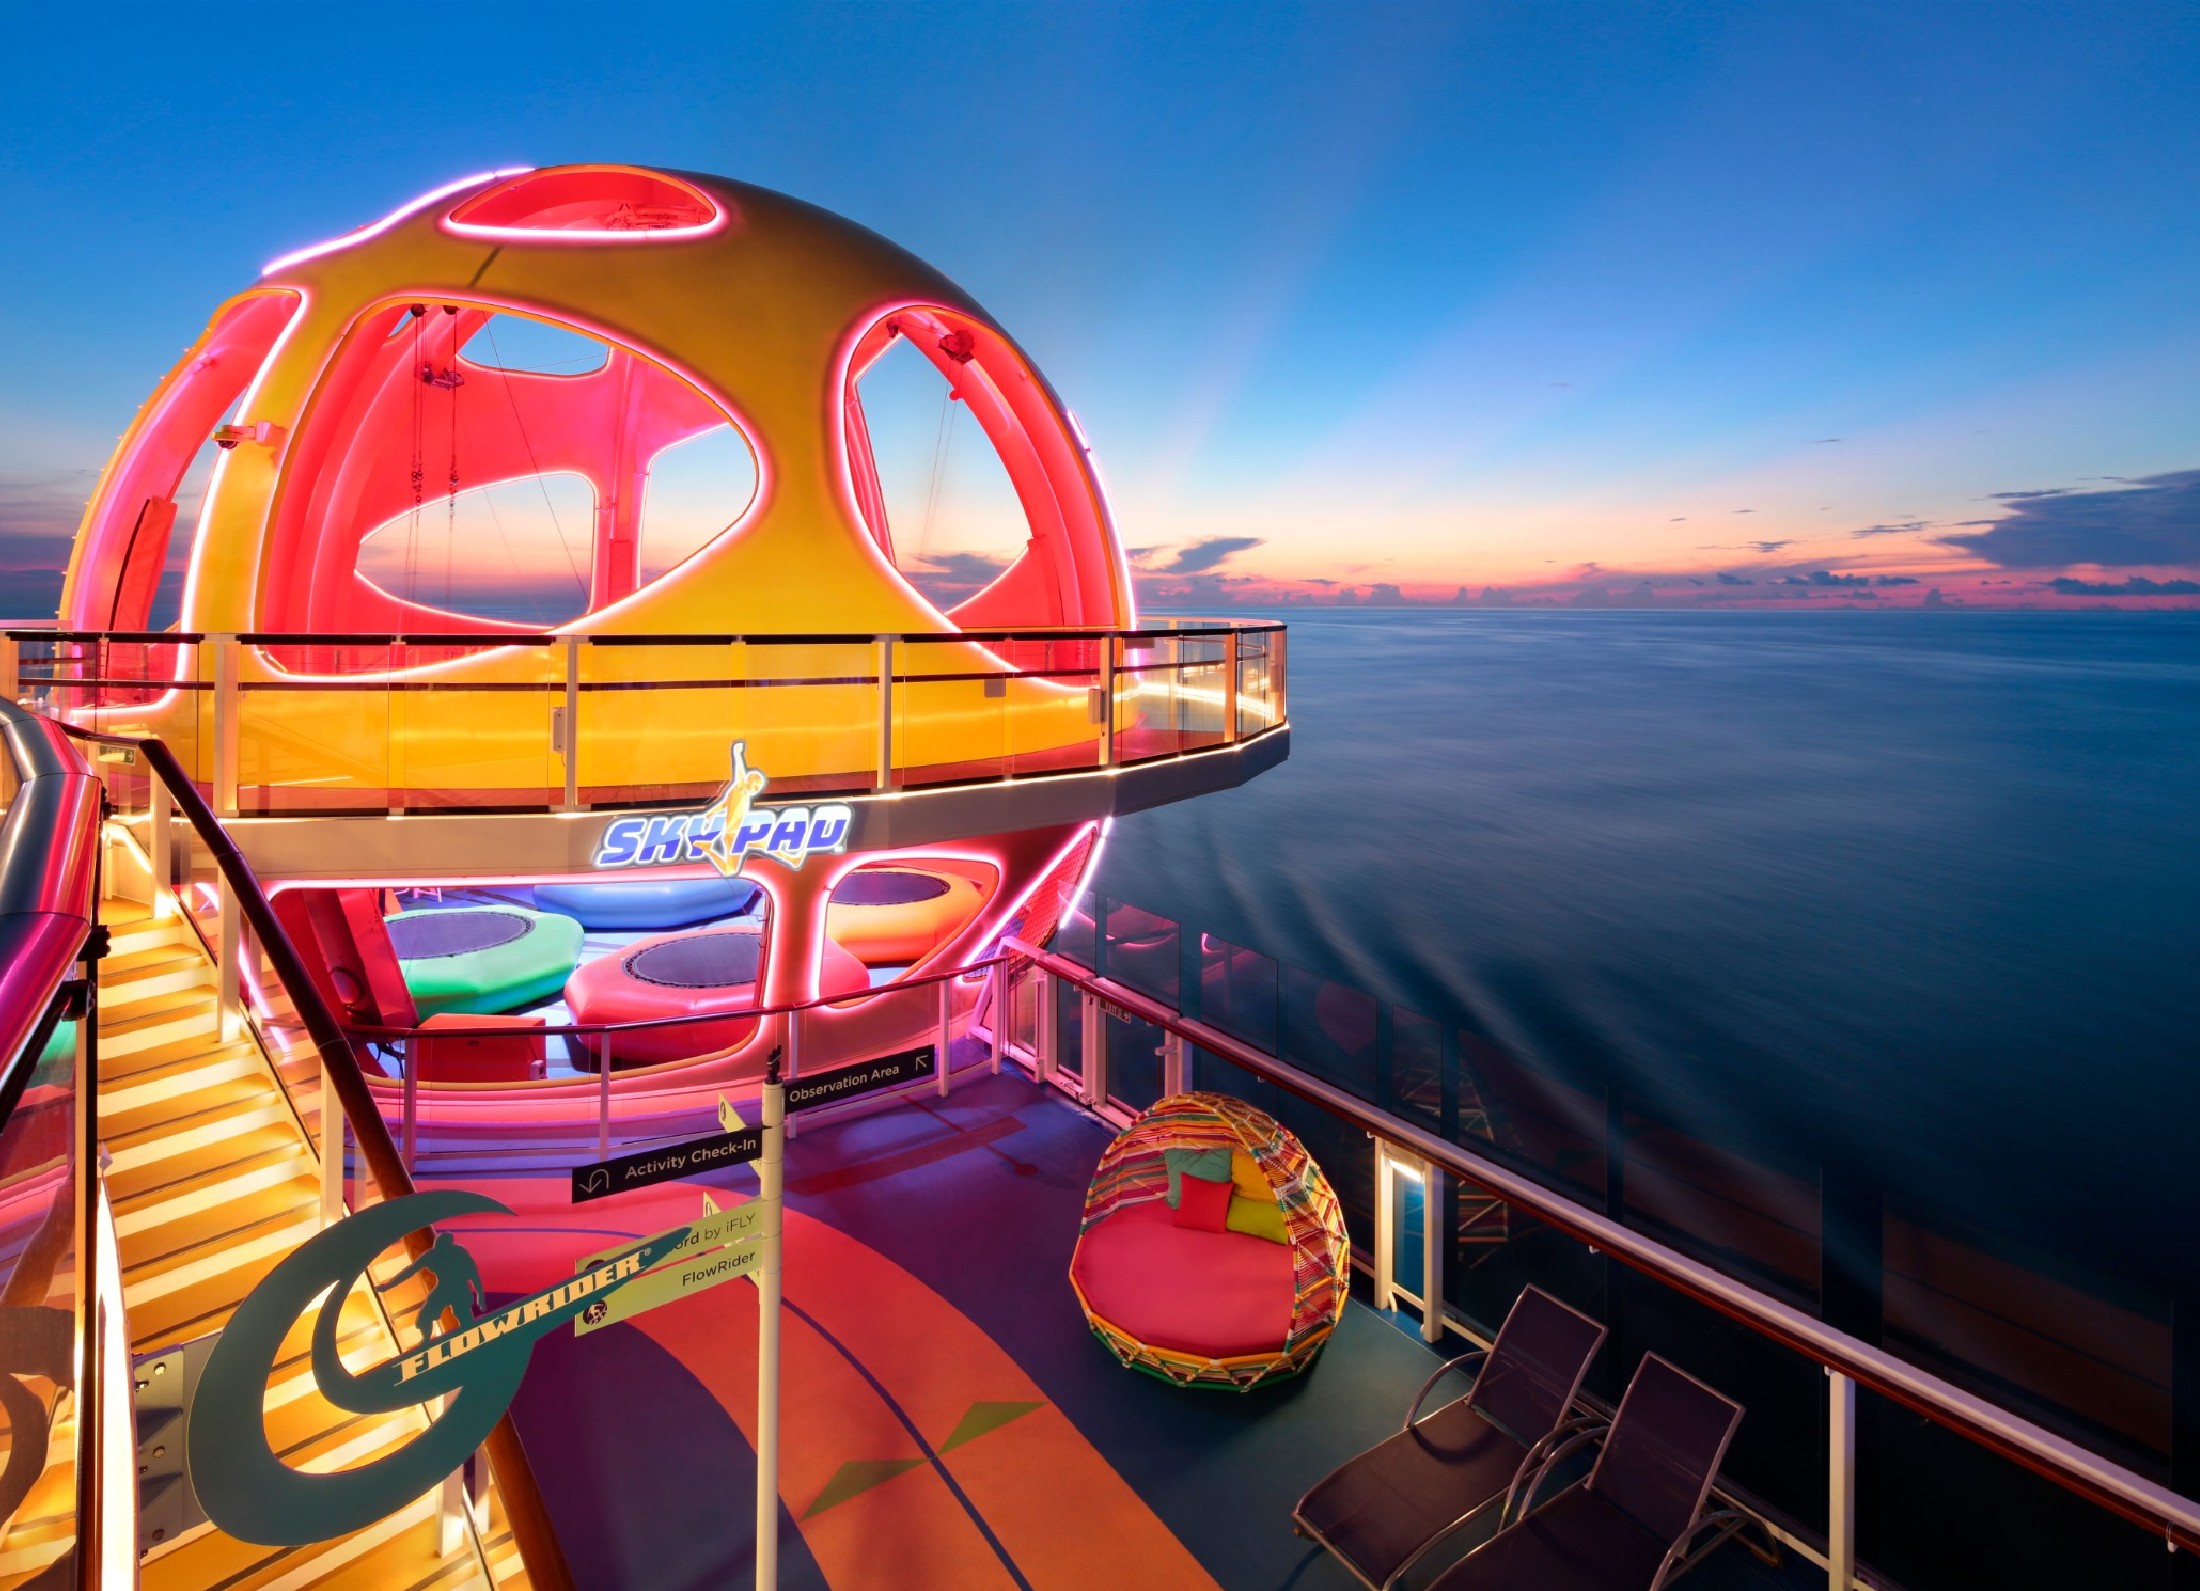 Sky Pad on board Odyssey of the Seas is a virtual reality, bungee trampoline adventure. The experience joins the lineup of thrills on board the ship, which include RipCord by iFly, the skydiving simulator; the FlowRider surf simulator; and the rock climbing wall.